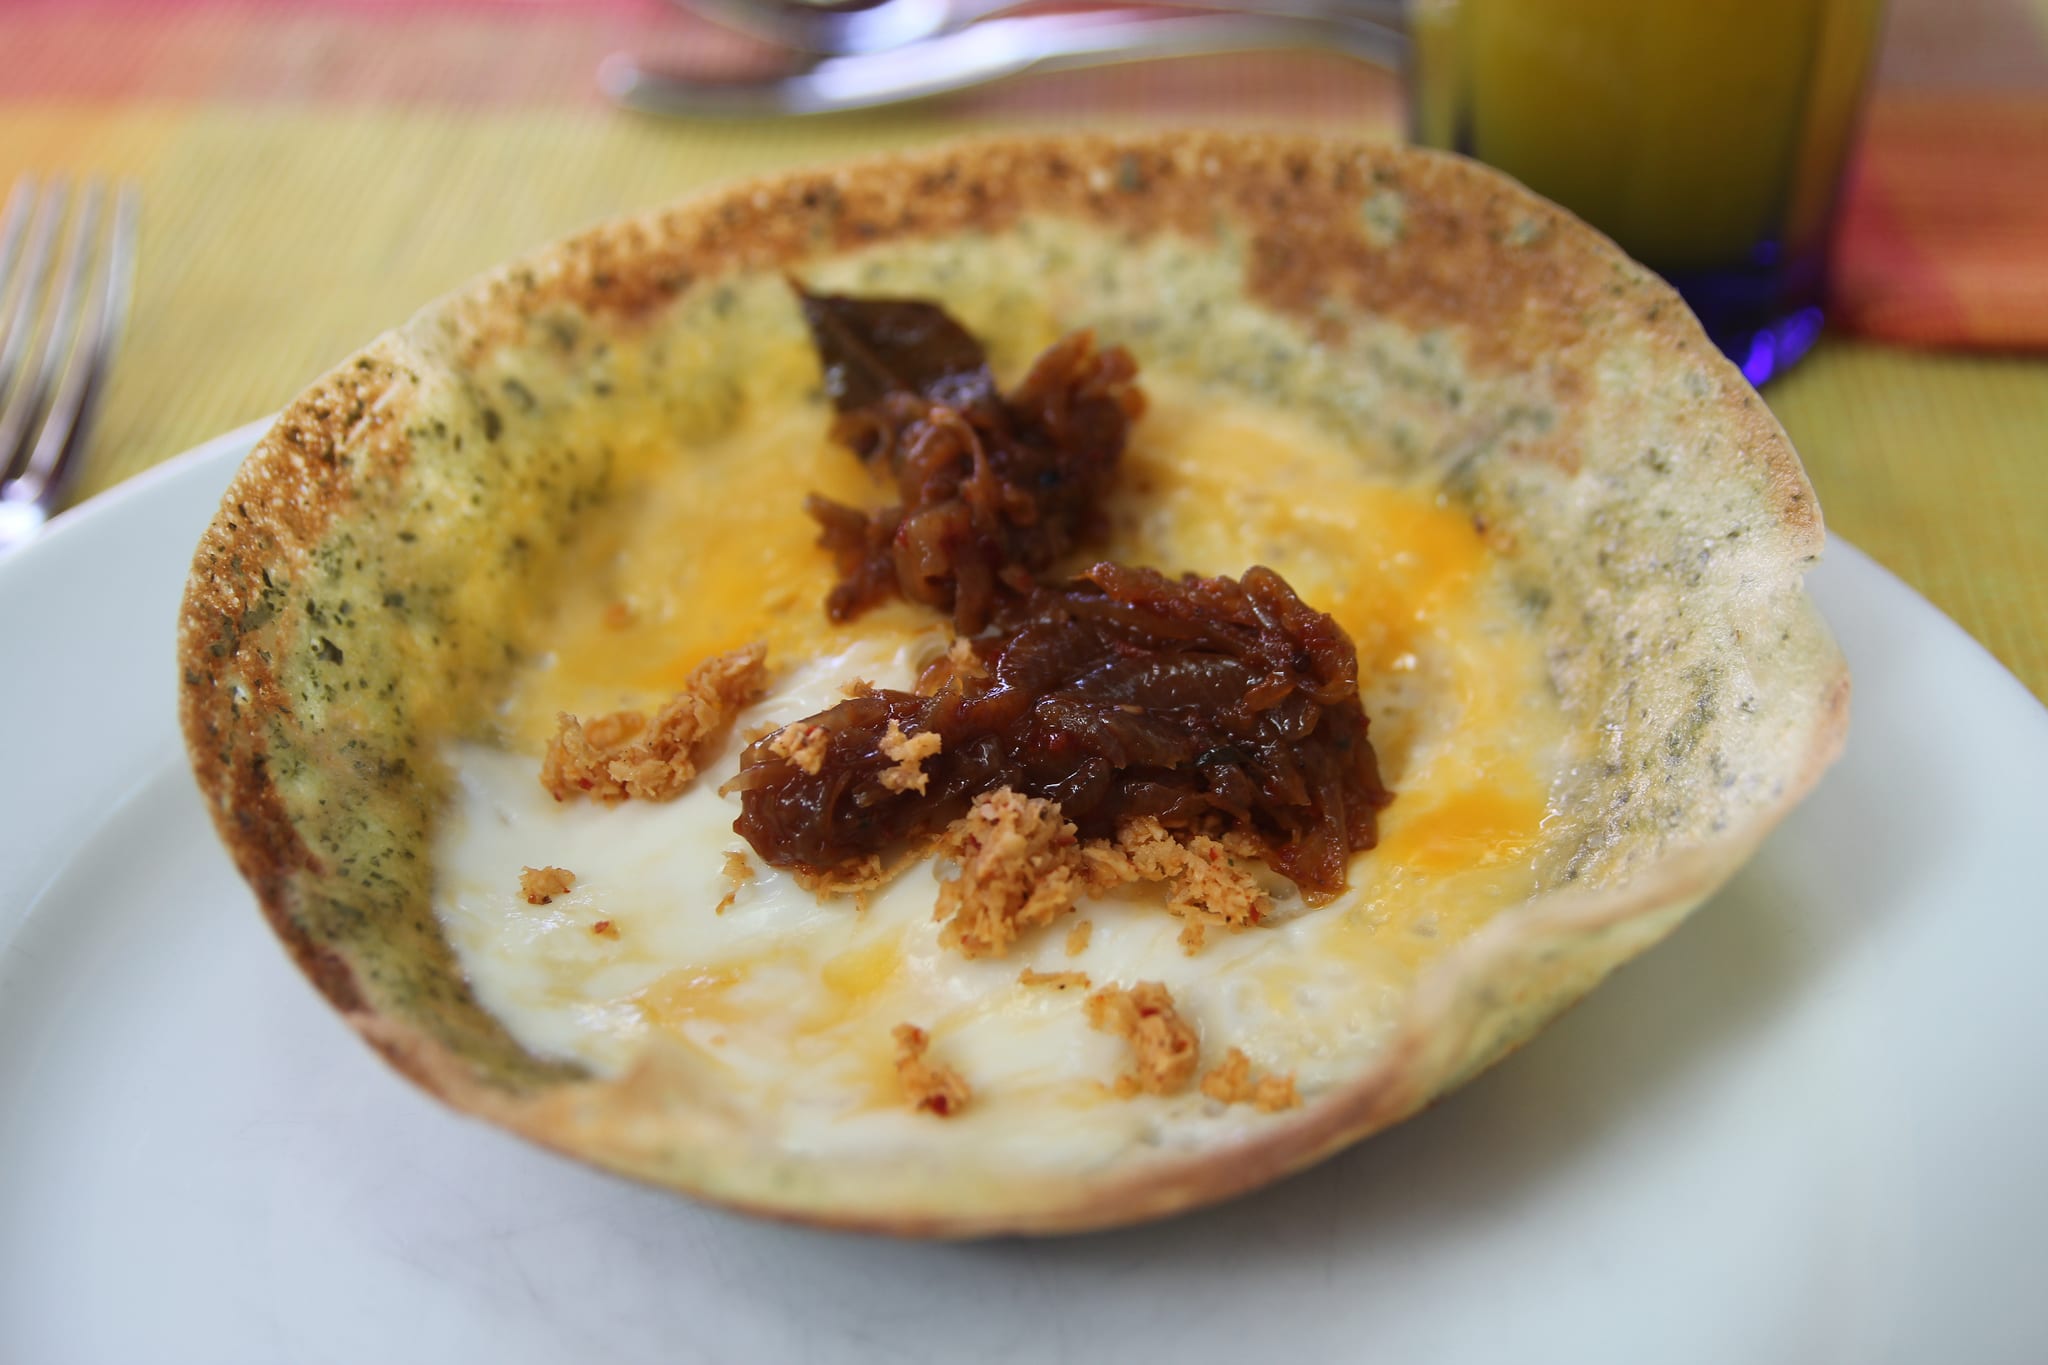 14. Hopper - Sri Lanka. 17 Delish Street Foods to Try Before You Die – THE FLASH PACK